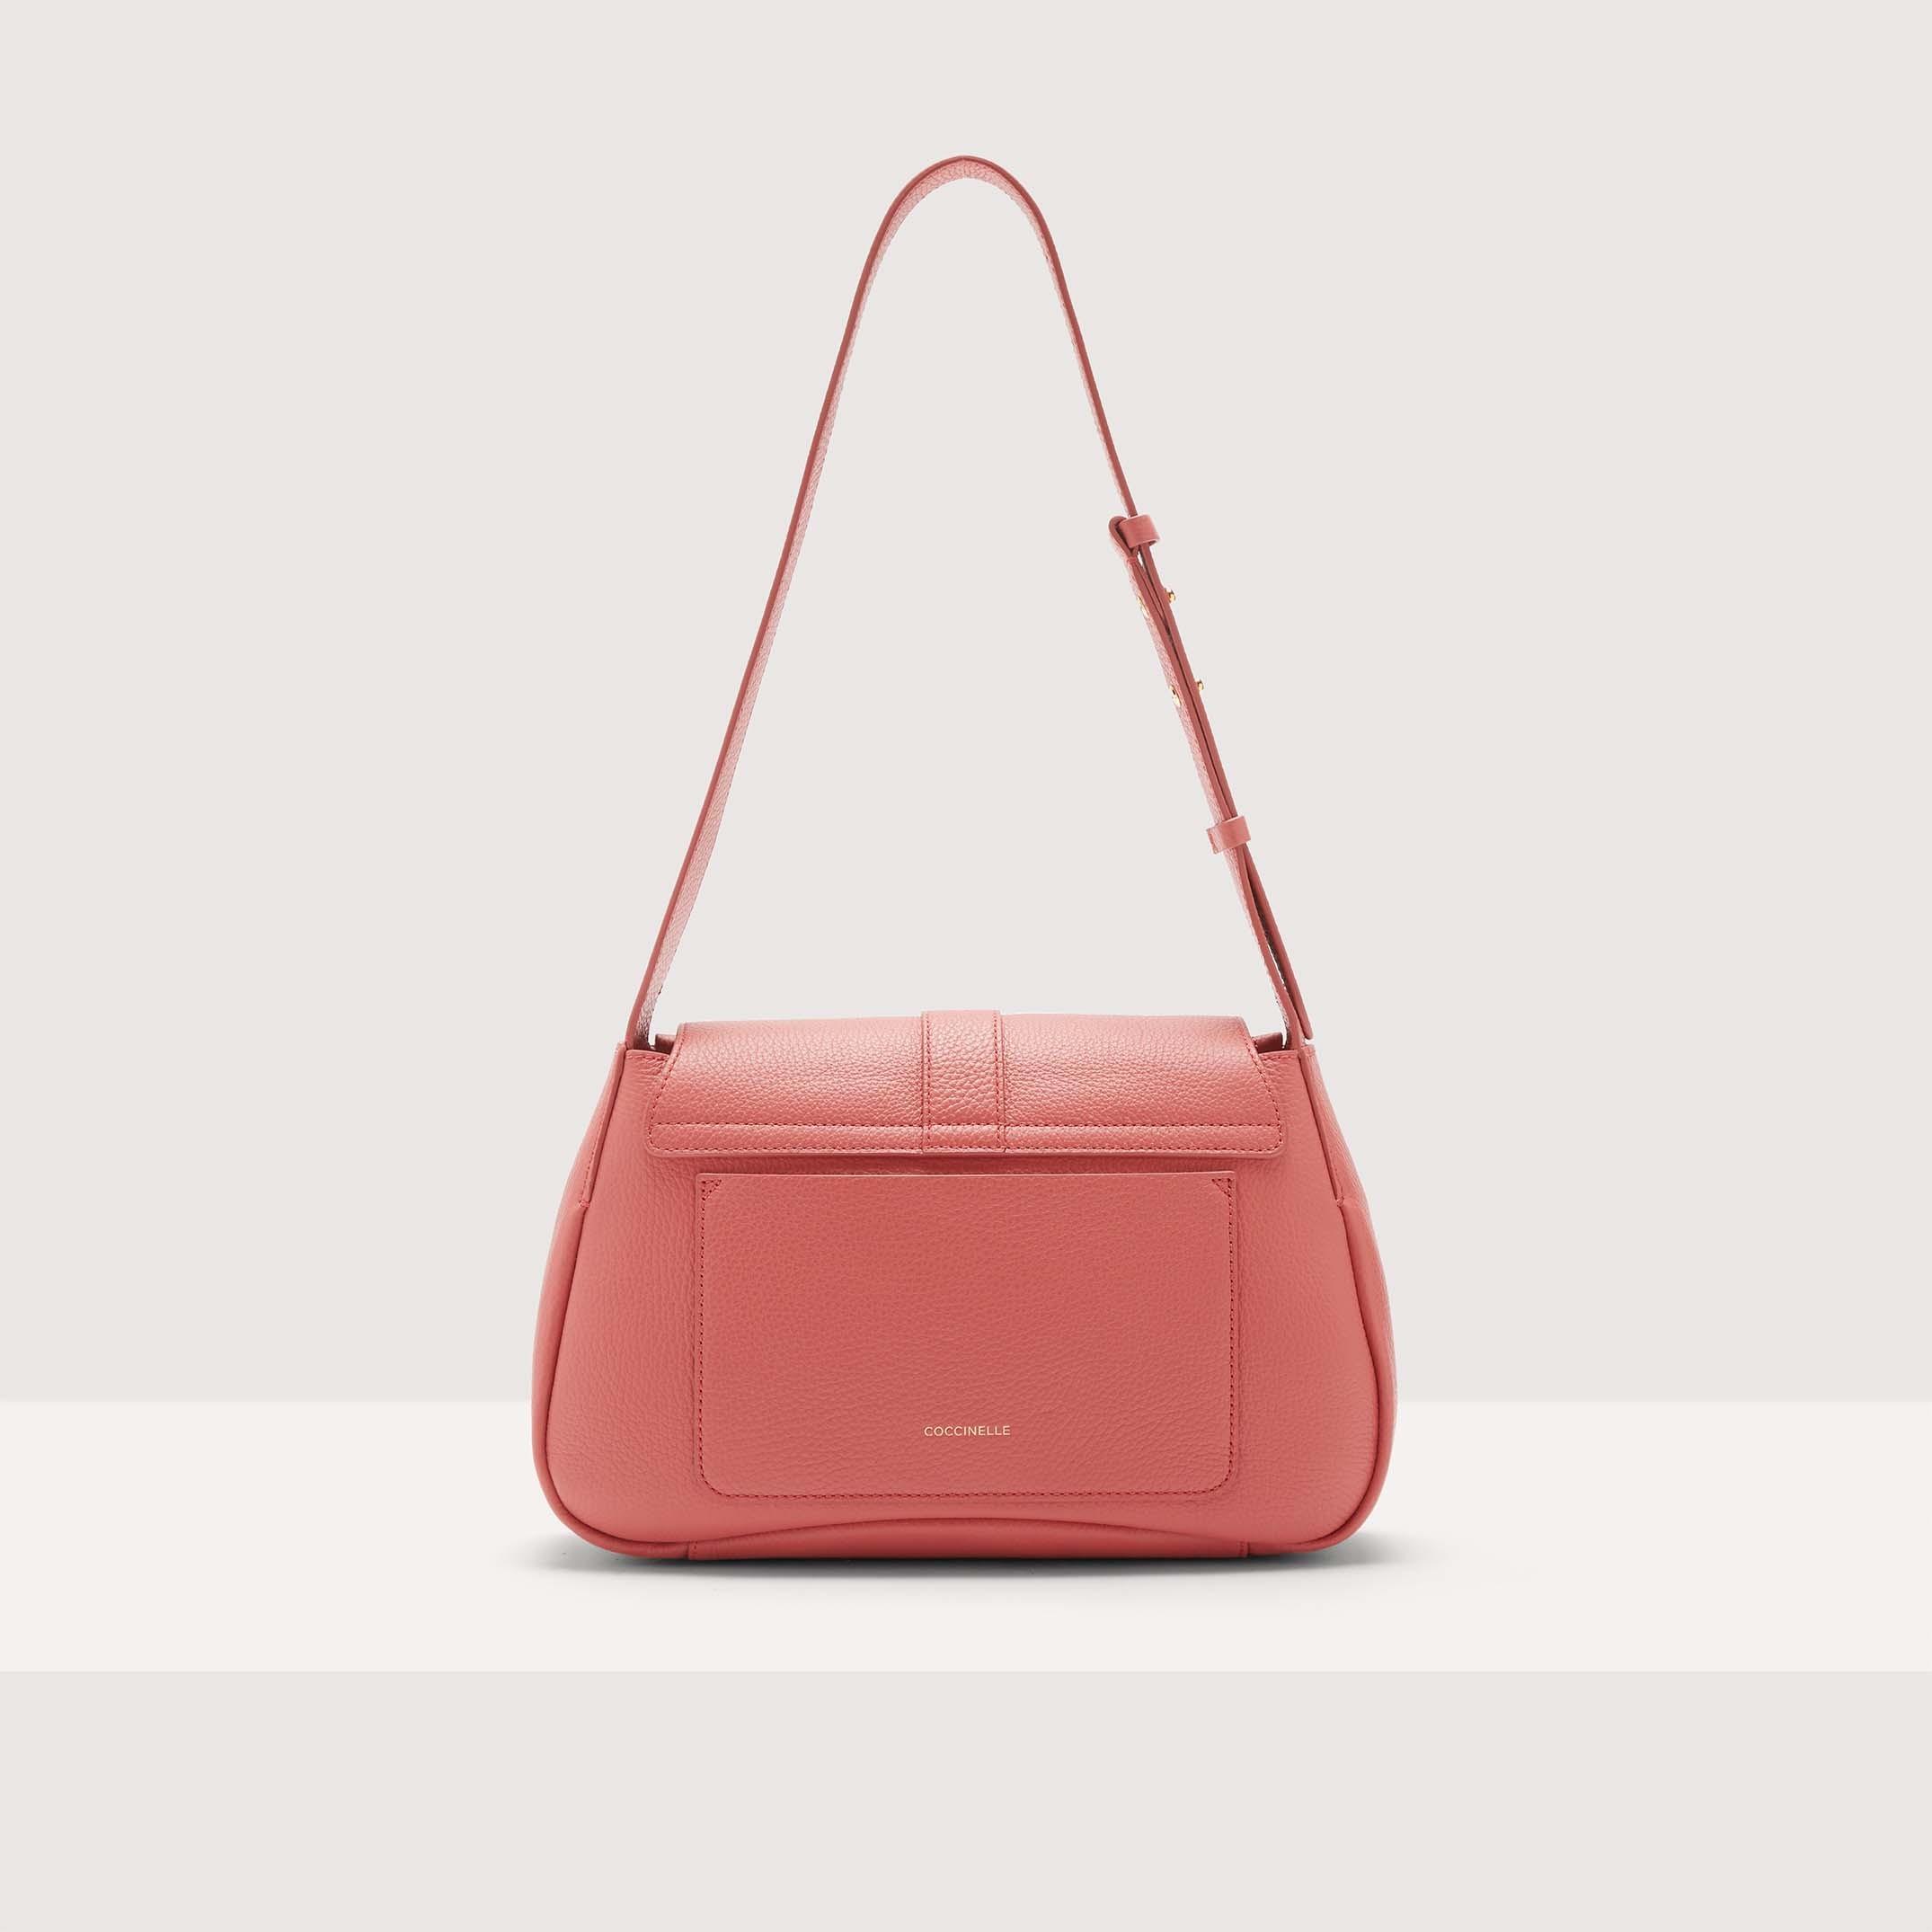 Coccinelle Grained Leather Shoulder Bag Himma Medium in Pink | Lyst